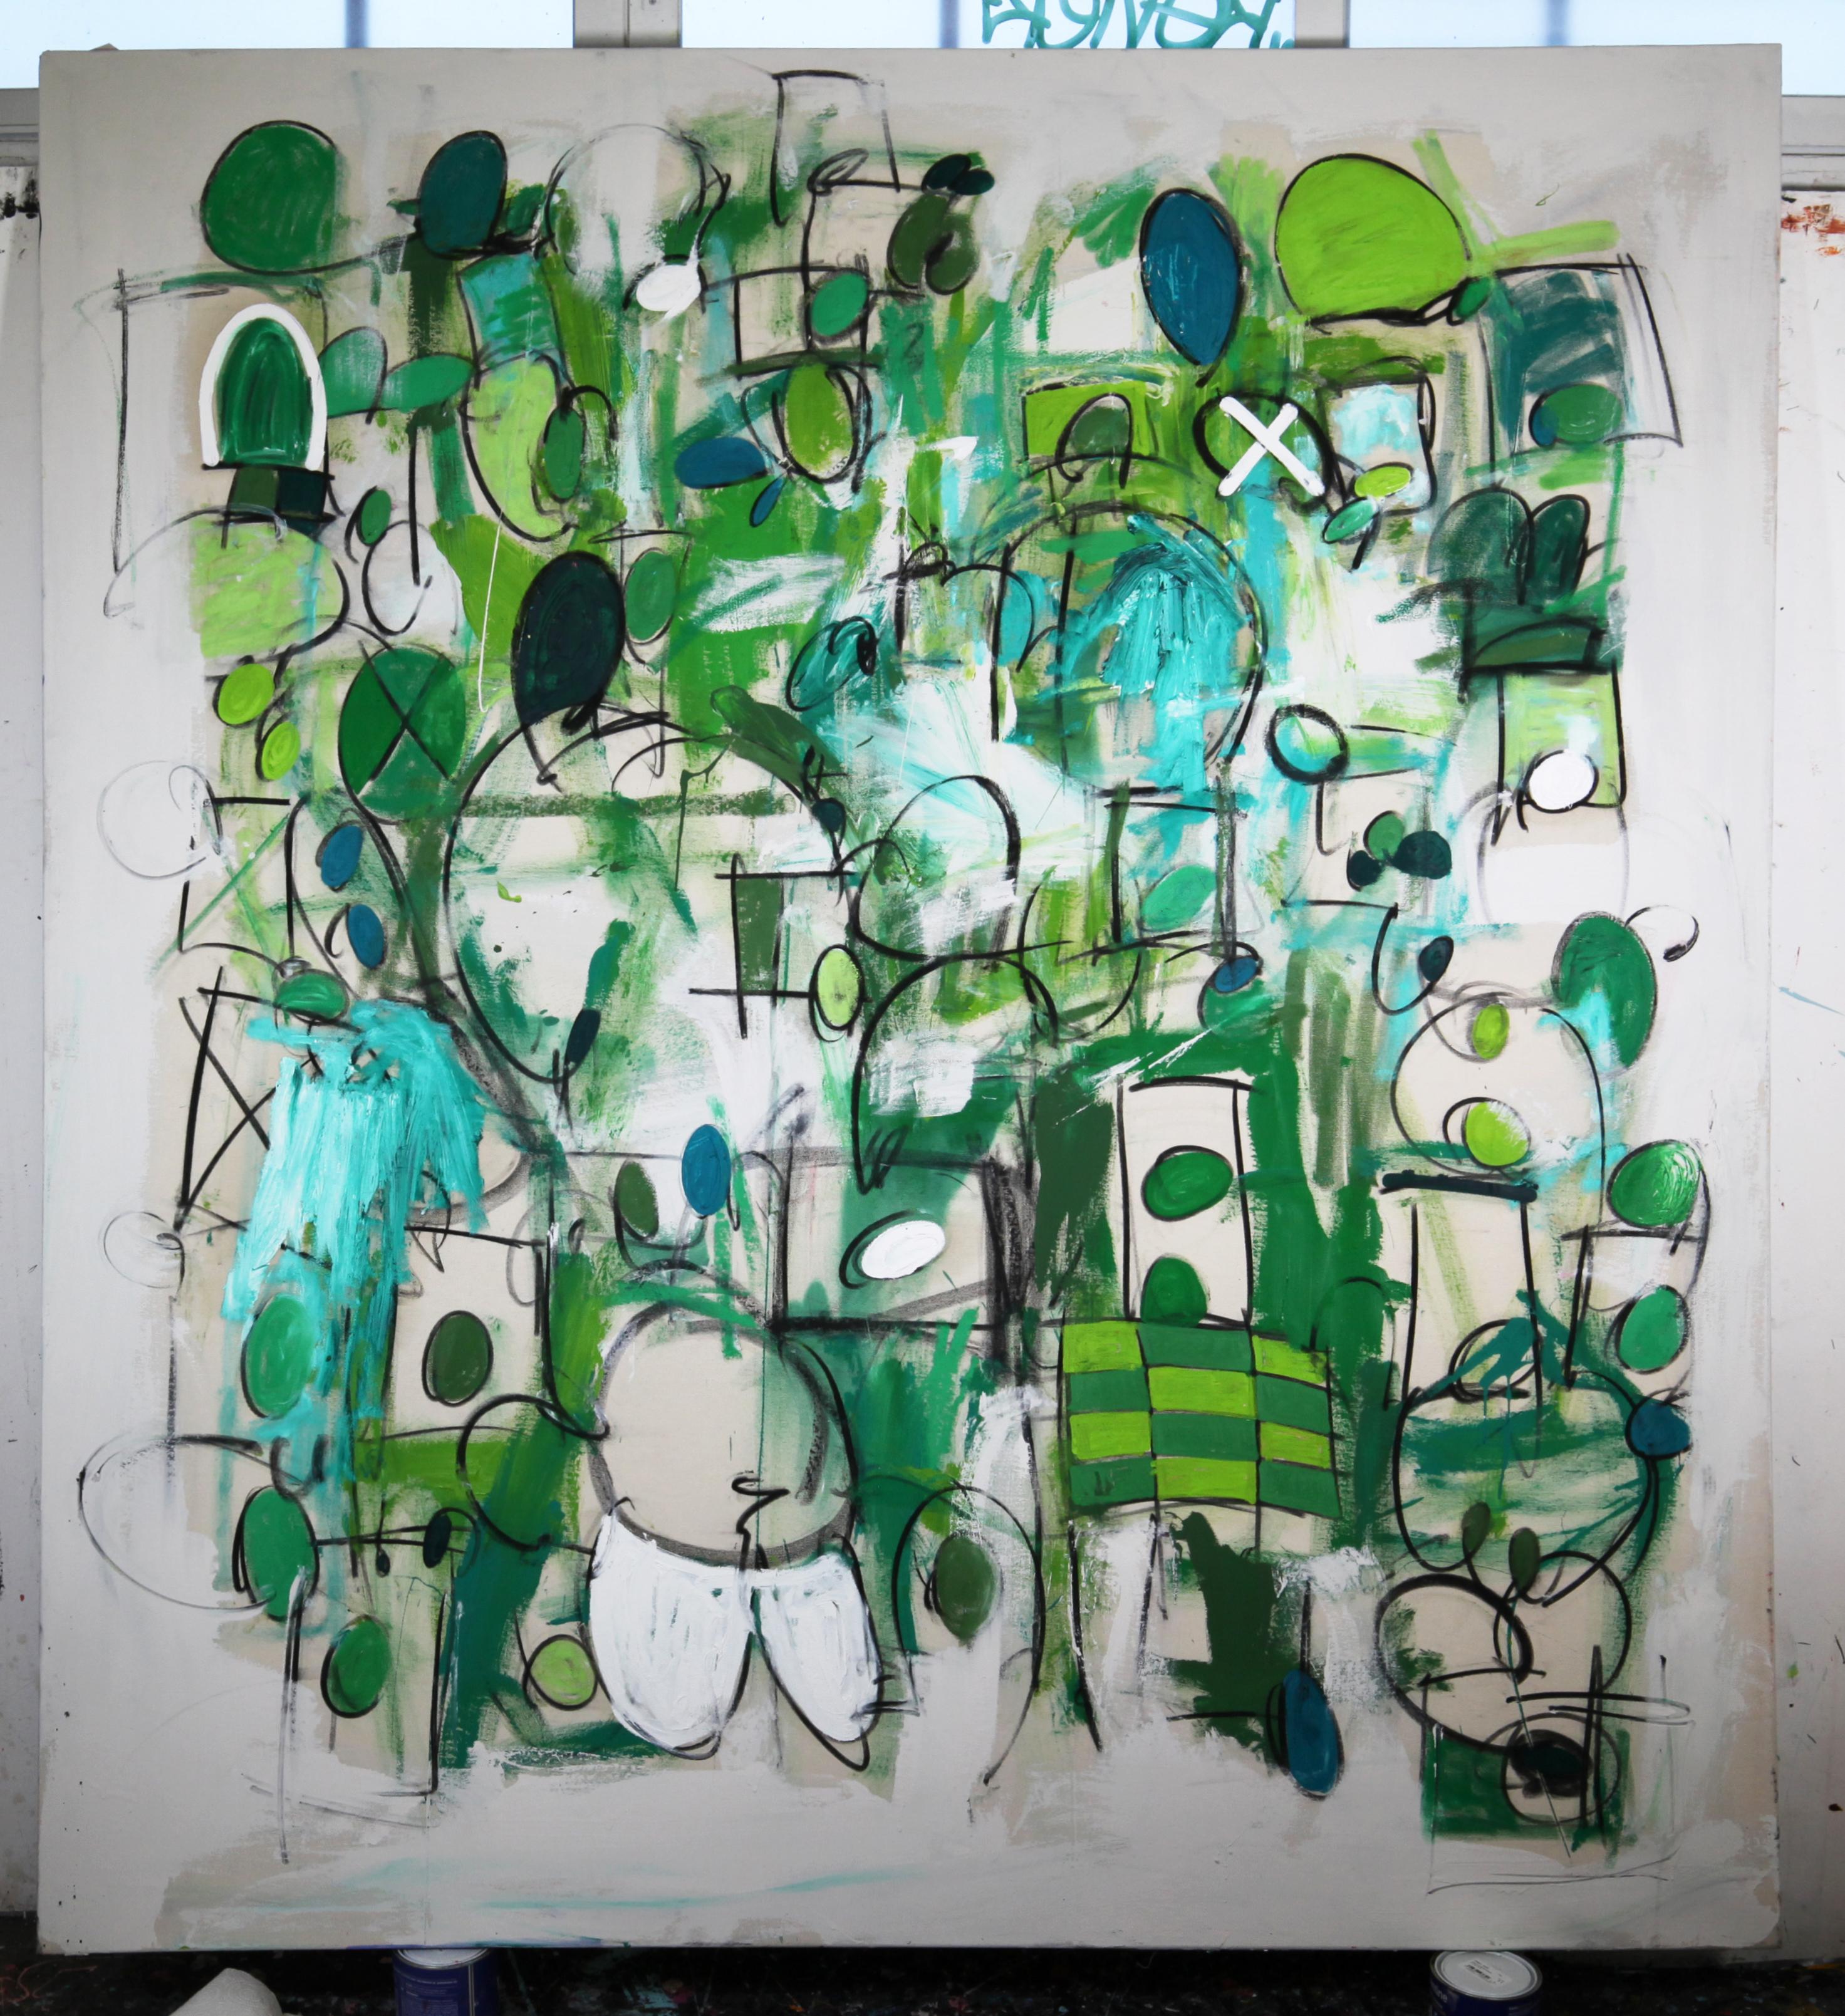 It's Truly a Lie / Large Colorful Abstract Painting / Green and White Colors - Mixed Media Art by Taher Jaoui